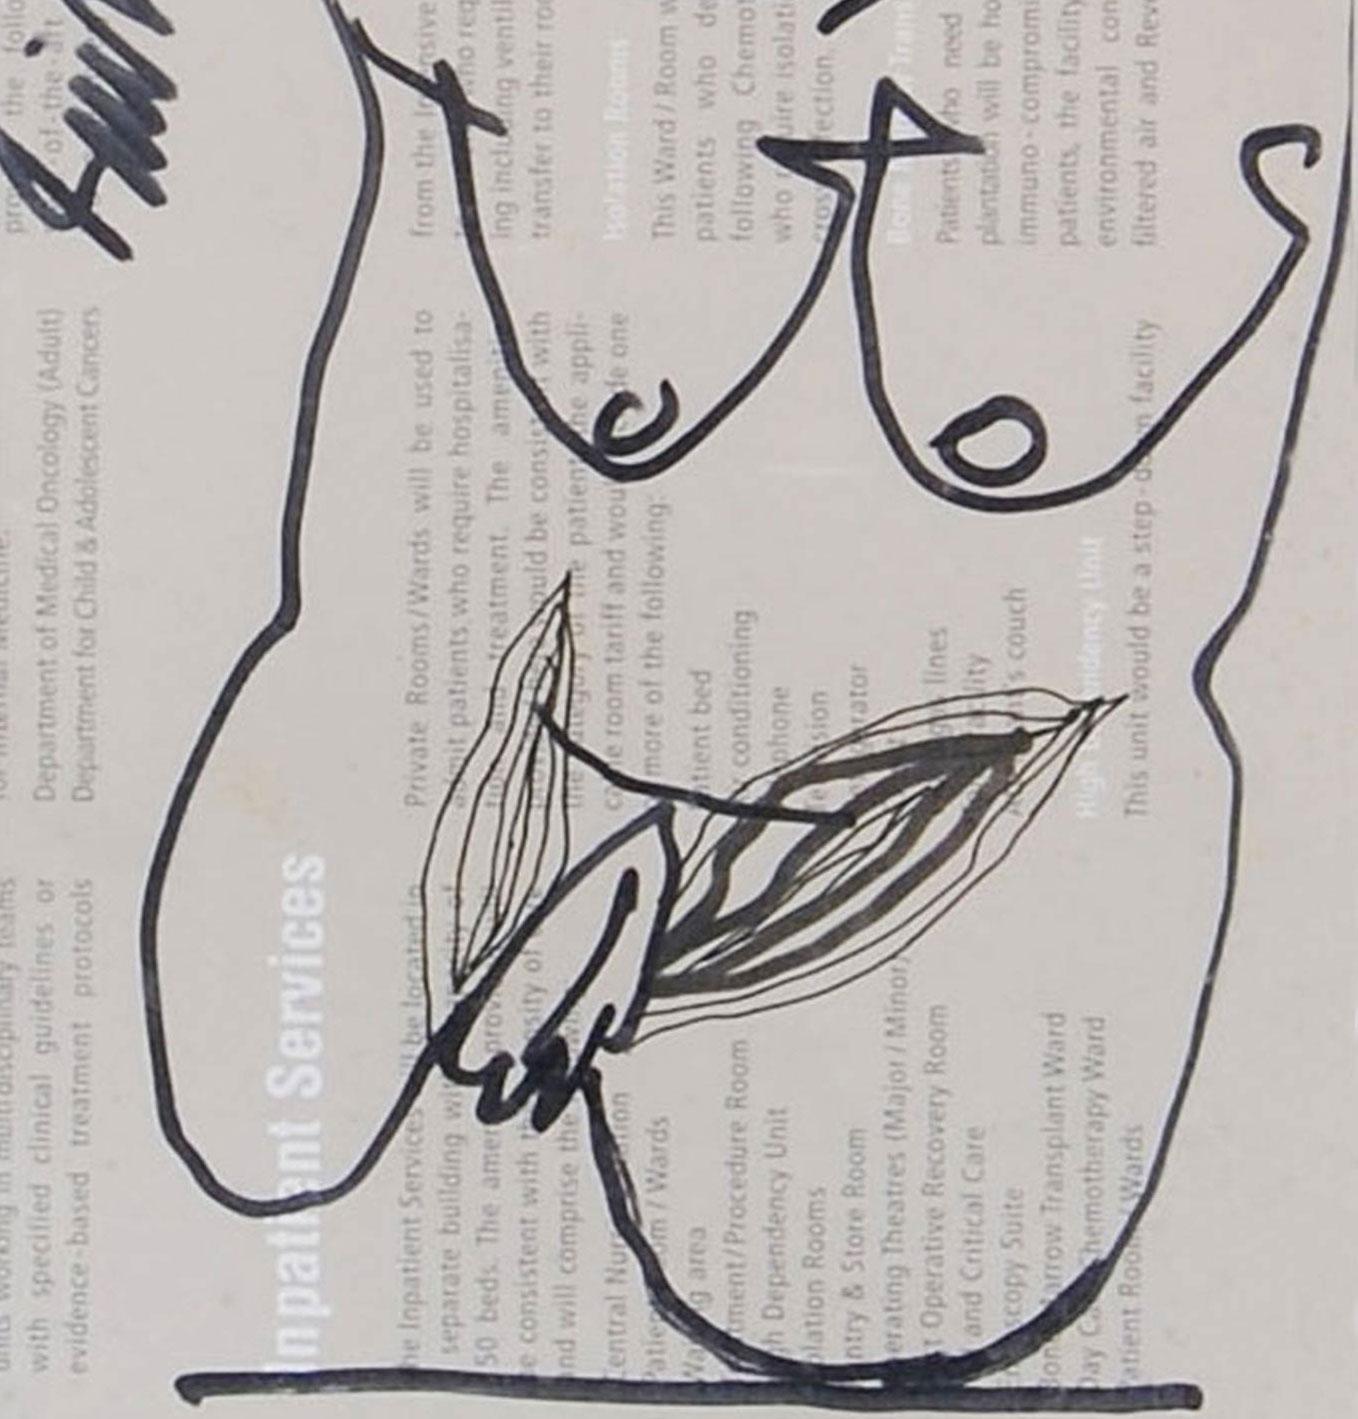 Sunil Das - Erotic Series III - 9 x 7 inches (unframed size)
Ink on Magazine Paper
Inclusive of shipment in ready to hang form.

Figures, female torsos in frontal nudity, a crouching cow and a horse and a galloping horse, profiles of human faces,